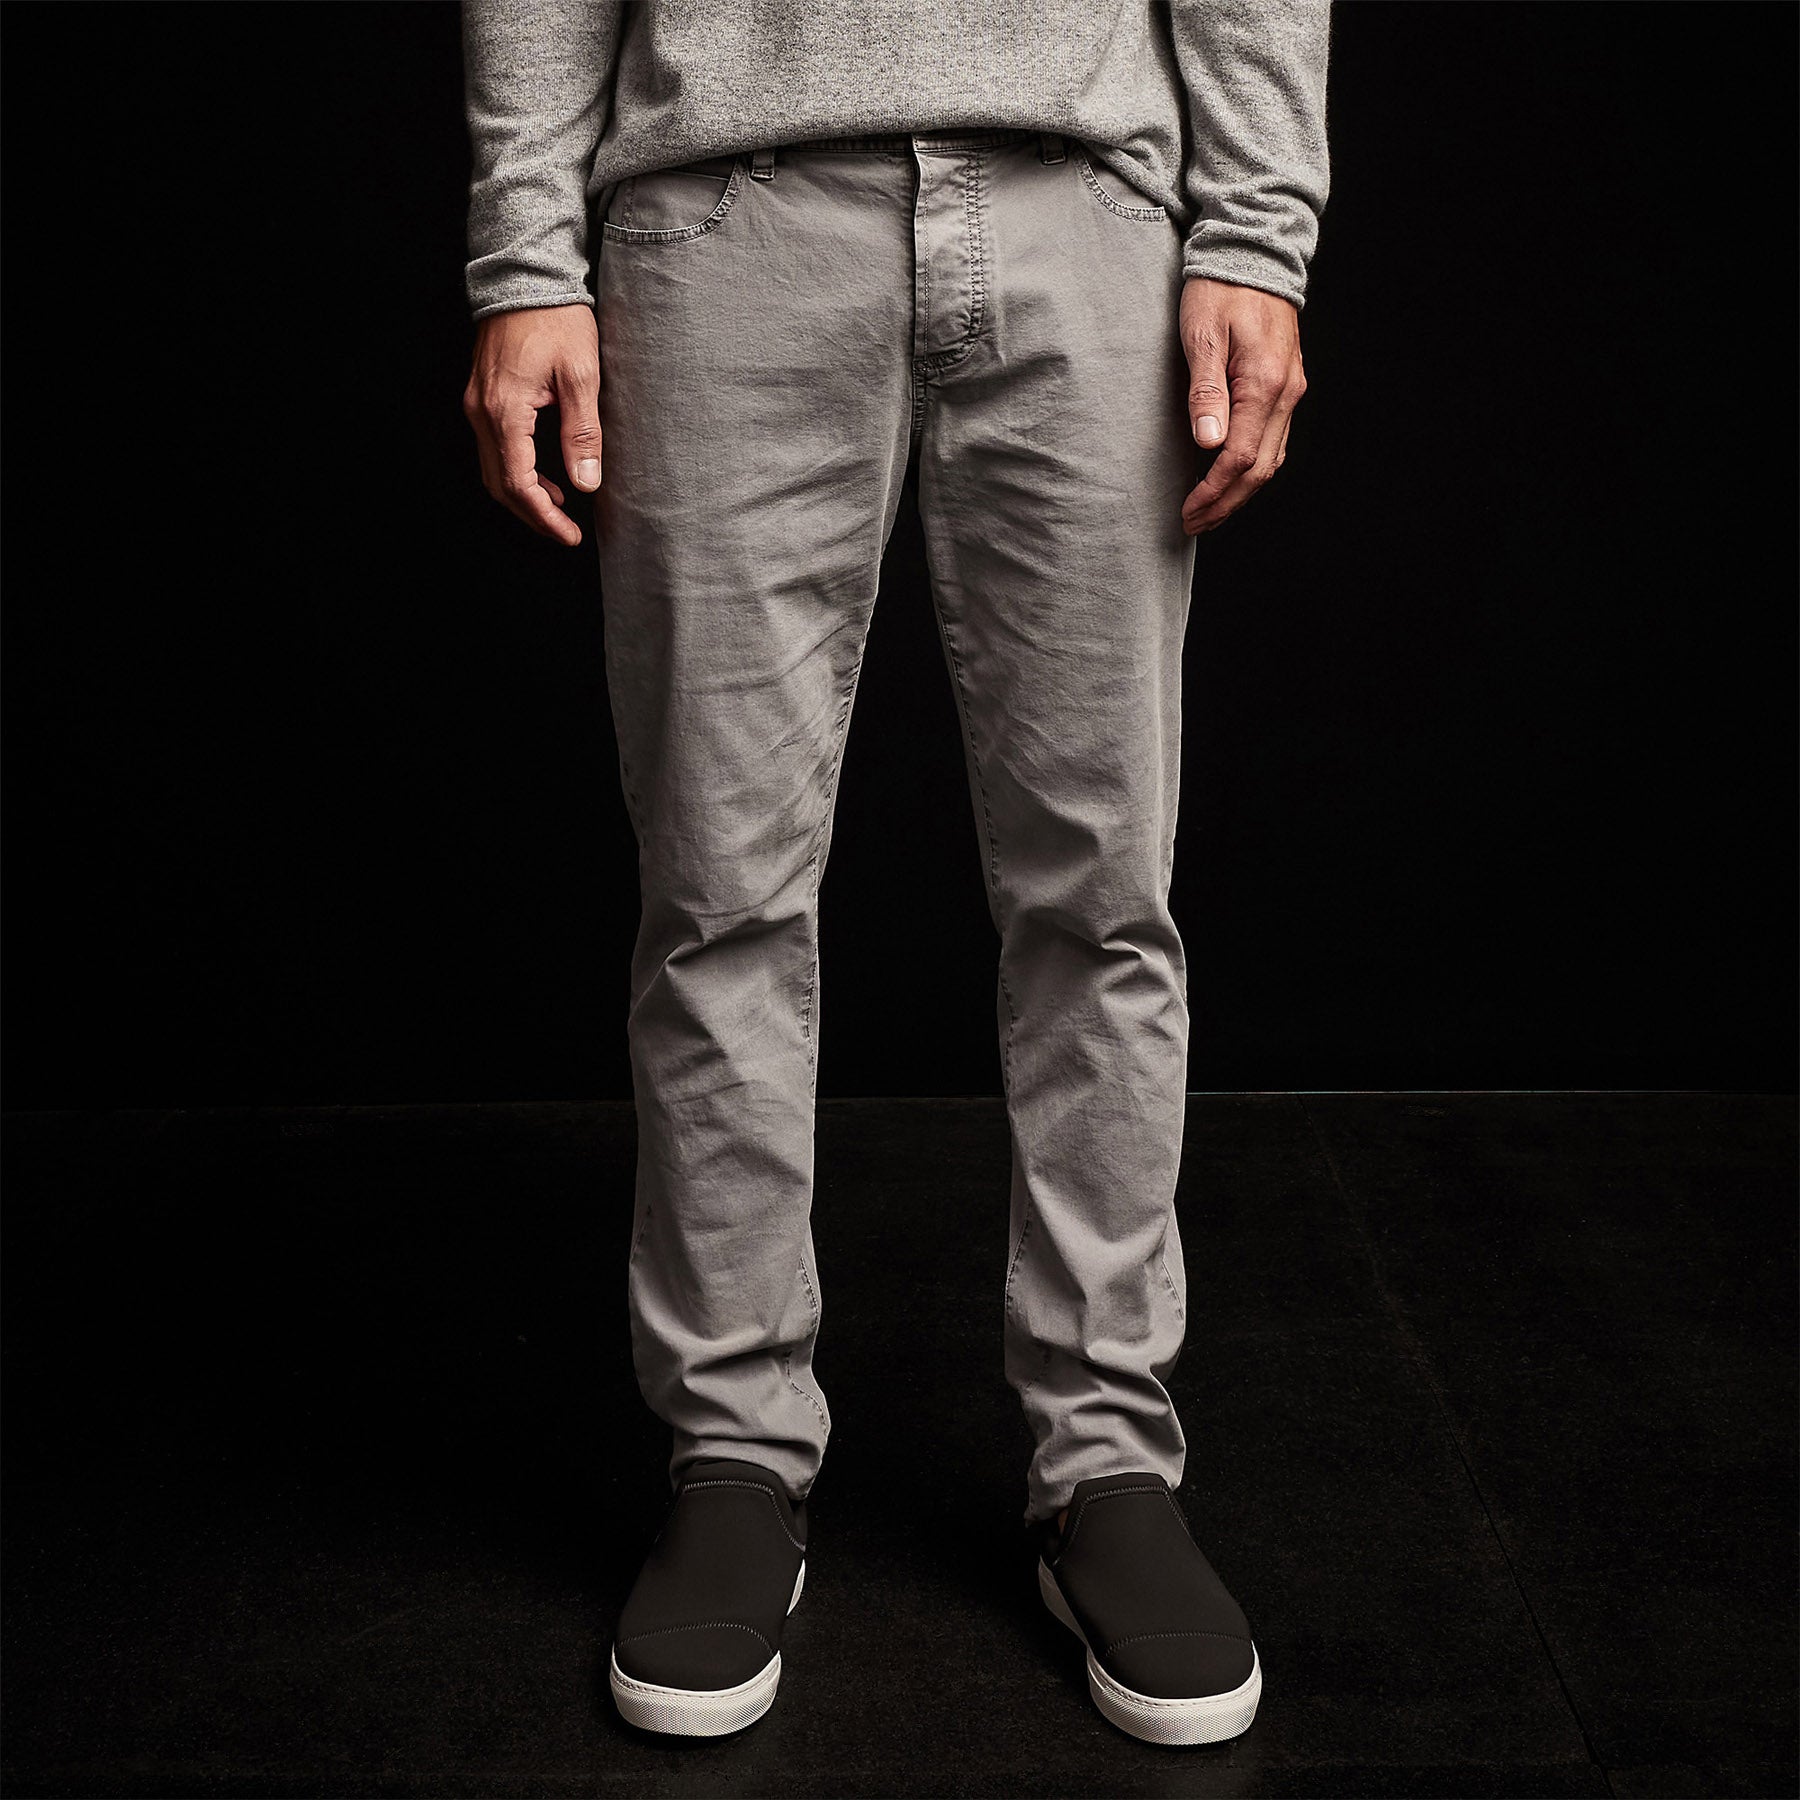 Brushed Twill 5 Pocket Pant - Silver Grey Pigment | James Perse 